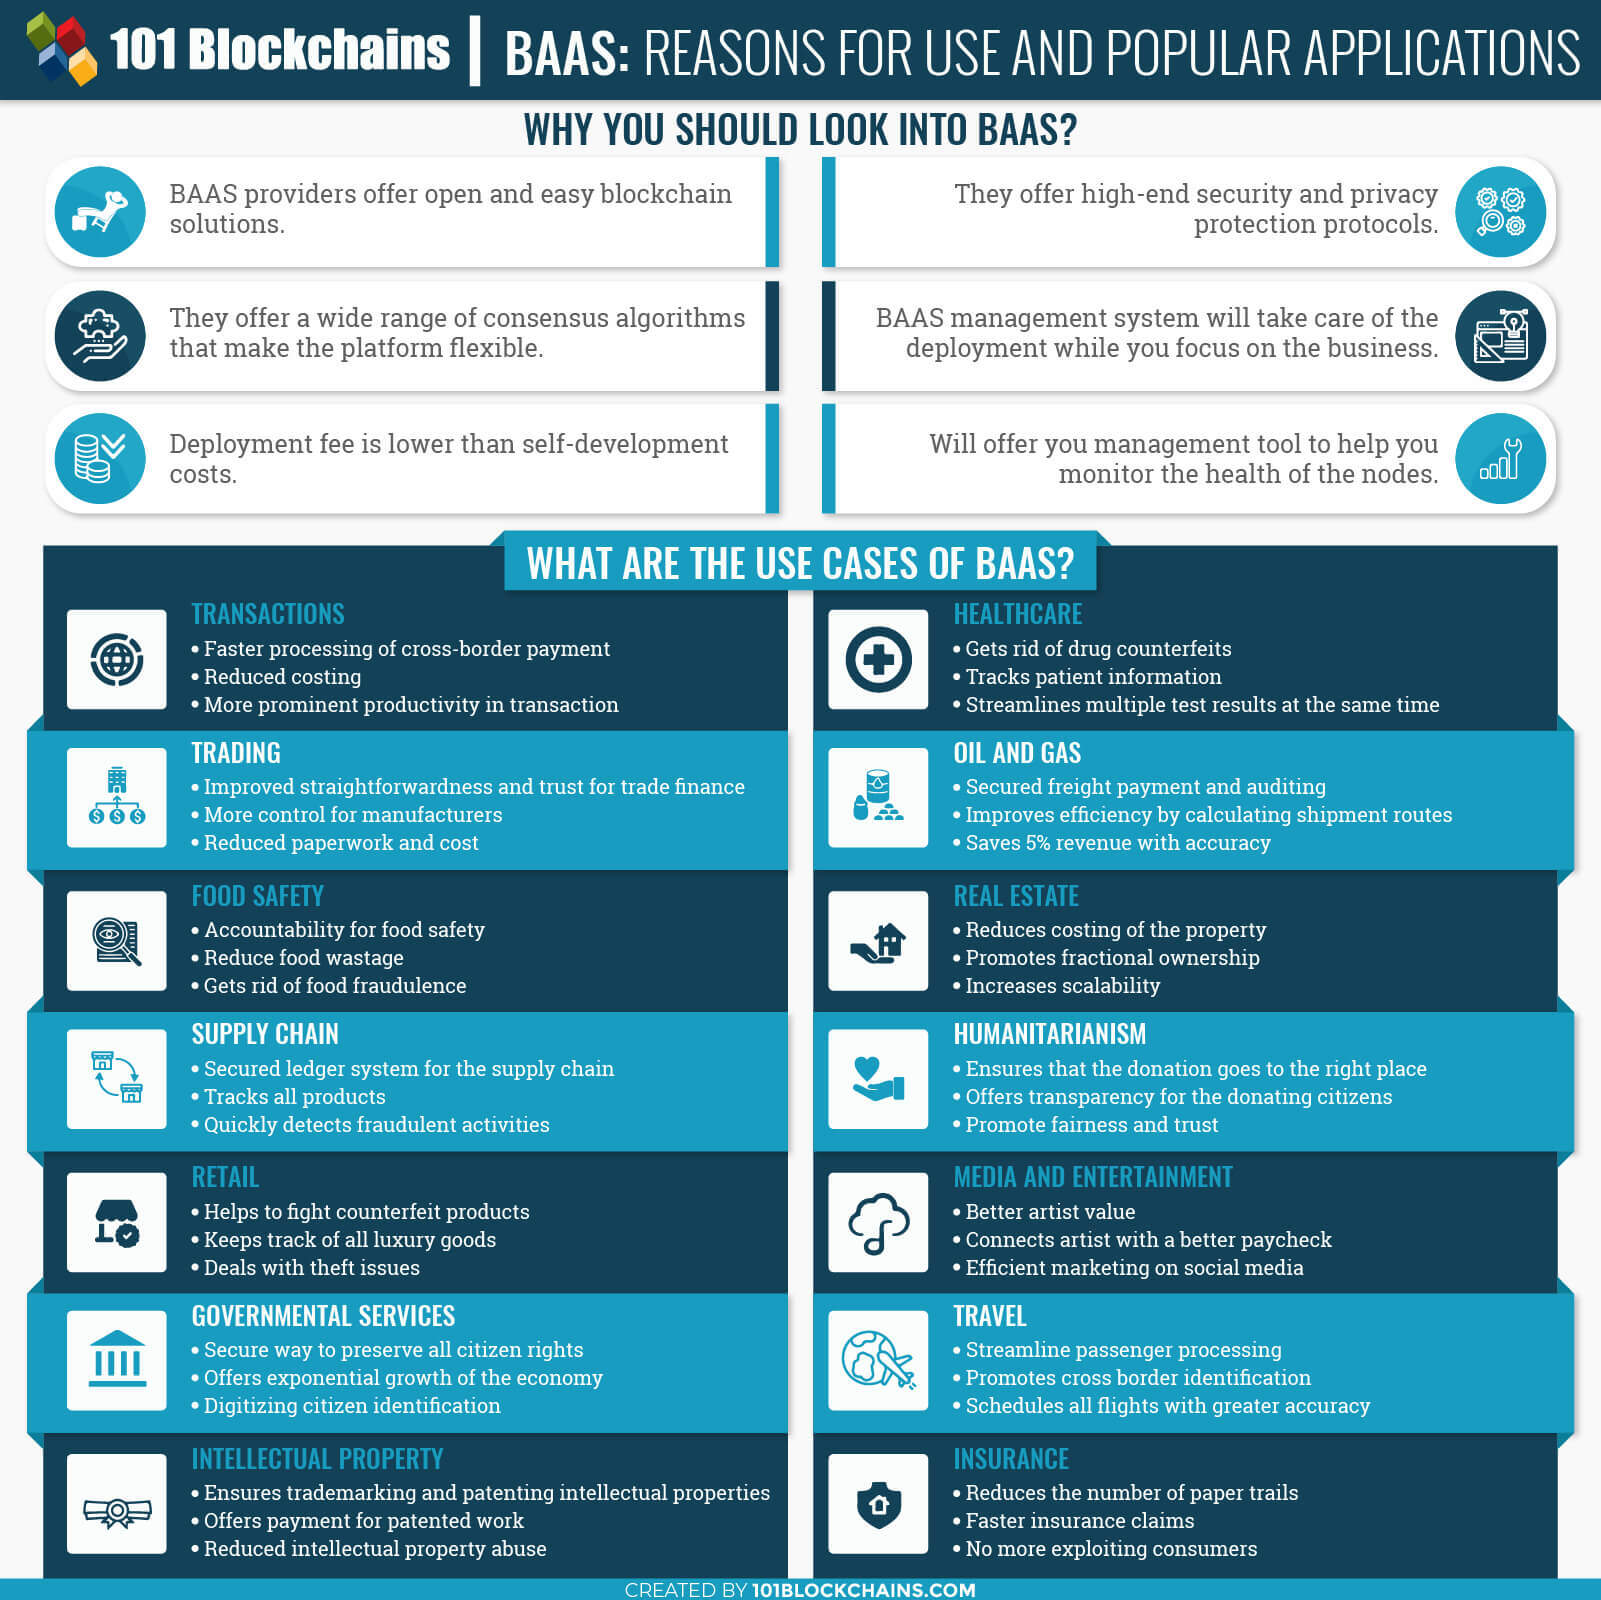 Blockchain as a Service Use Cases - Baas Popular Applications